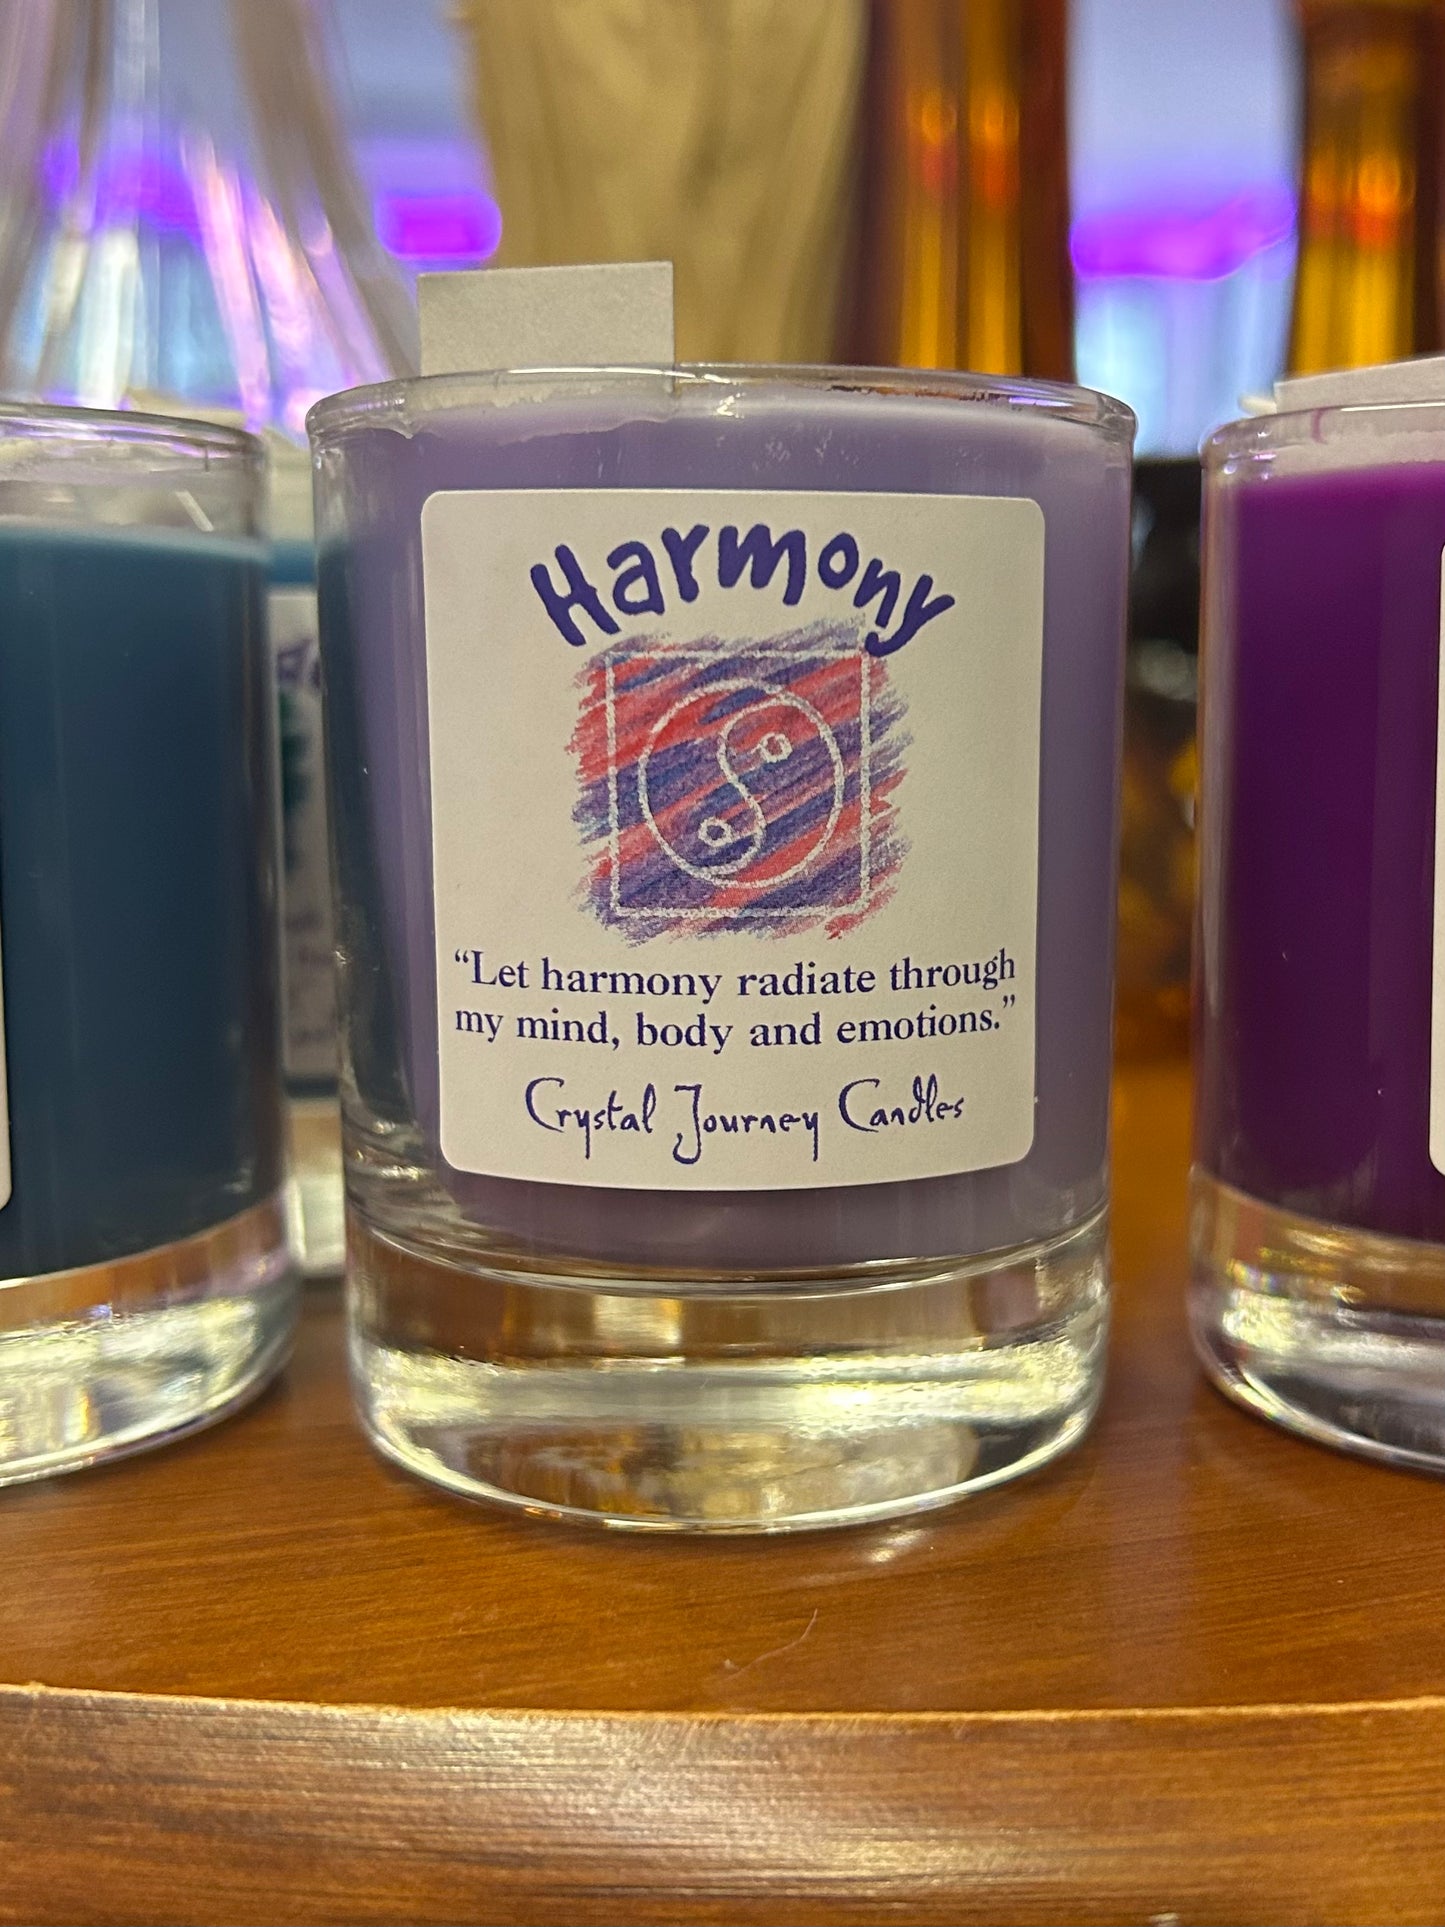 Crystal Journey Candle